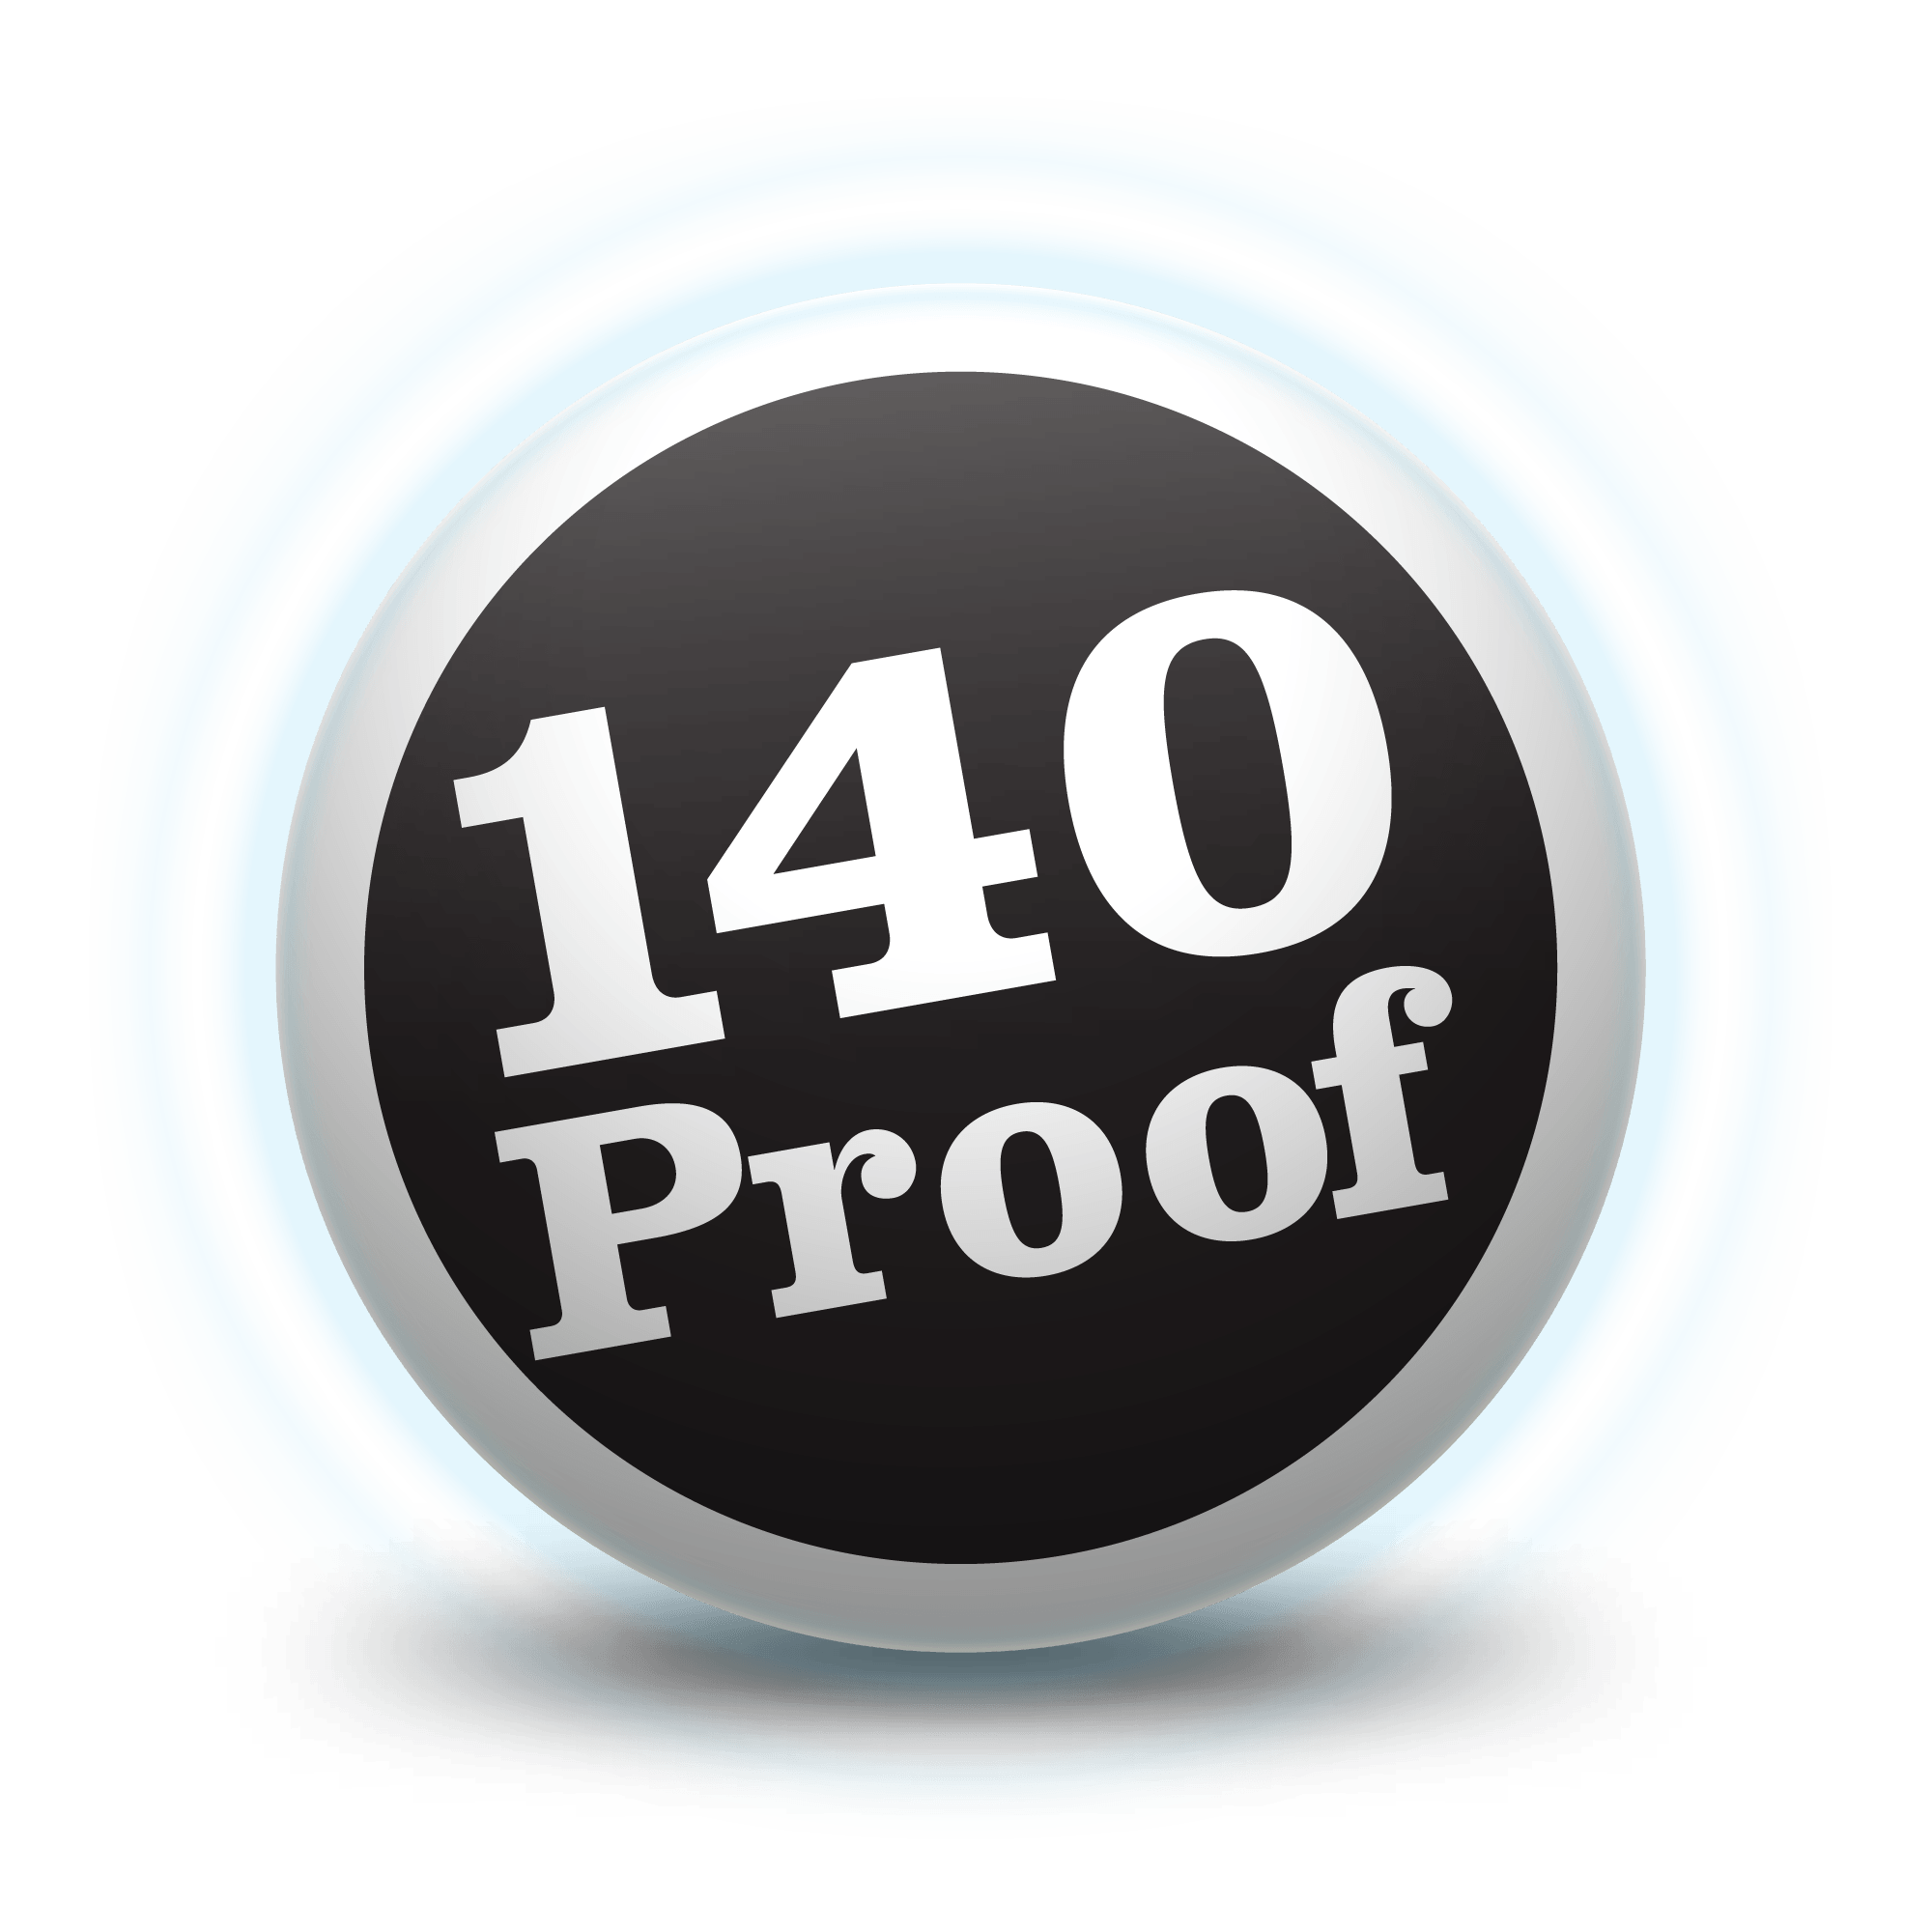 Proof Logo - Bloggers and Reporters: Download 140 Proof's logo at any size